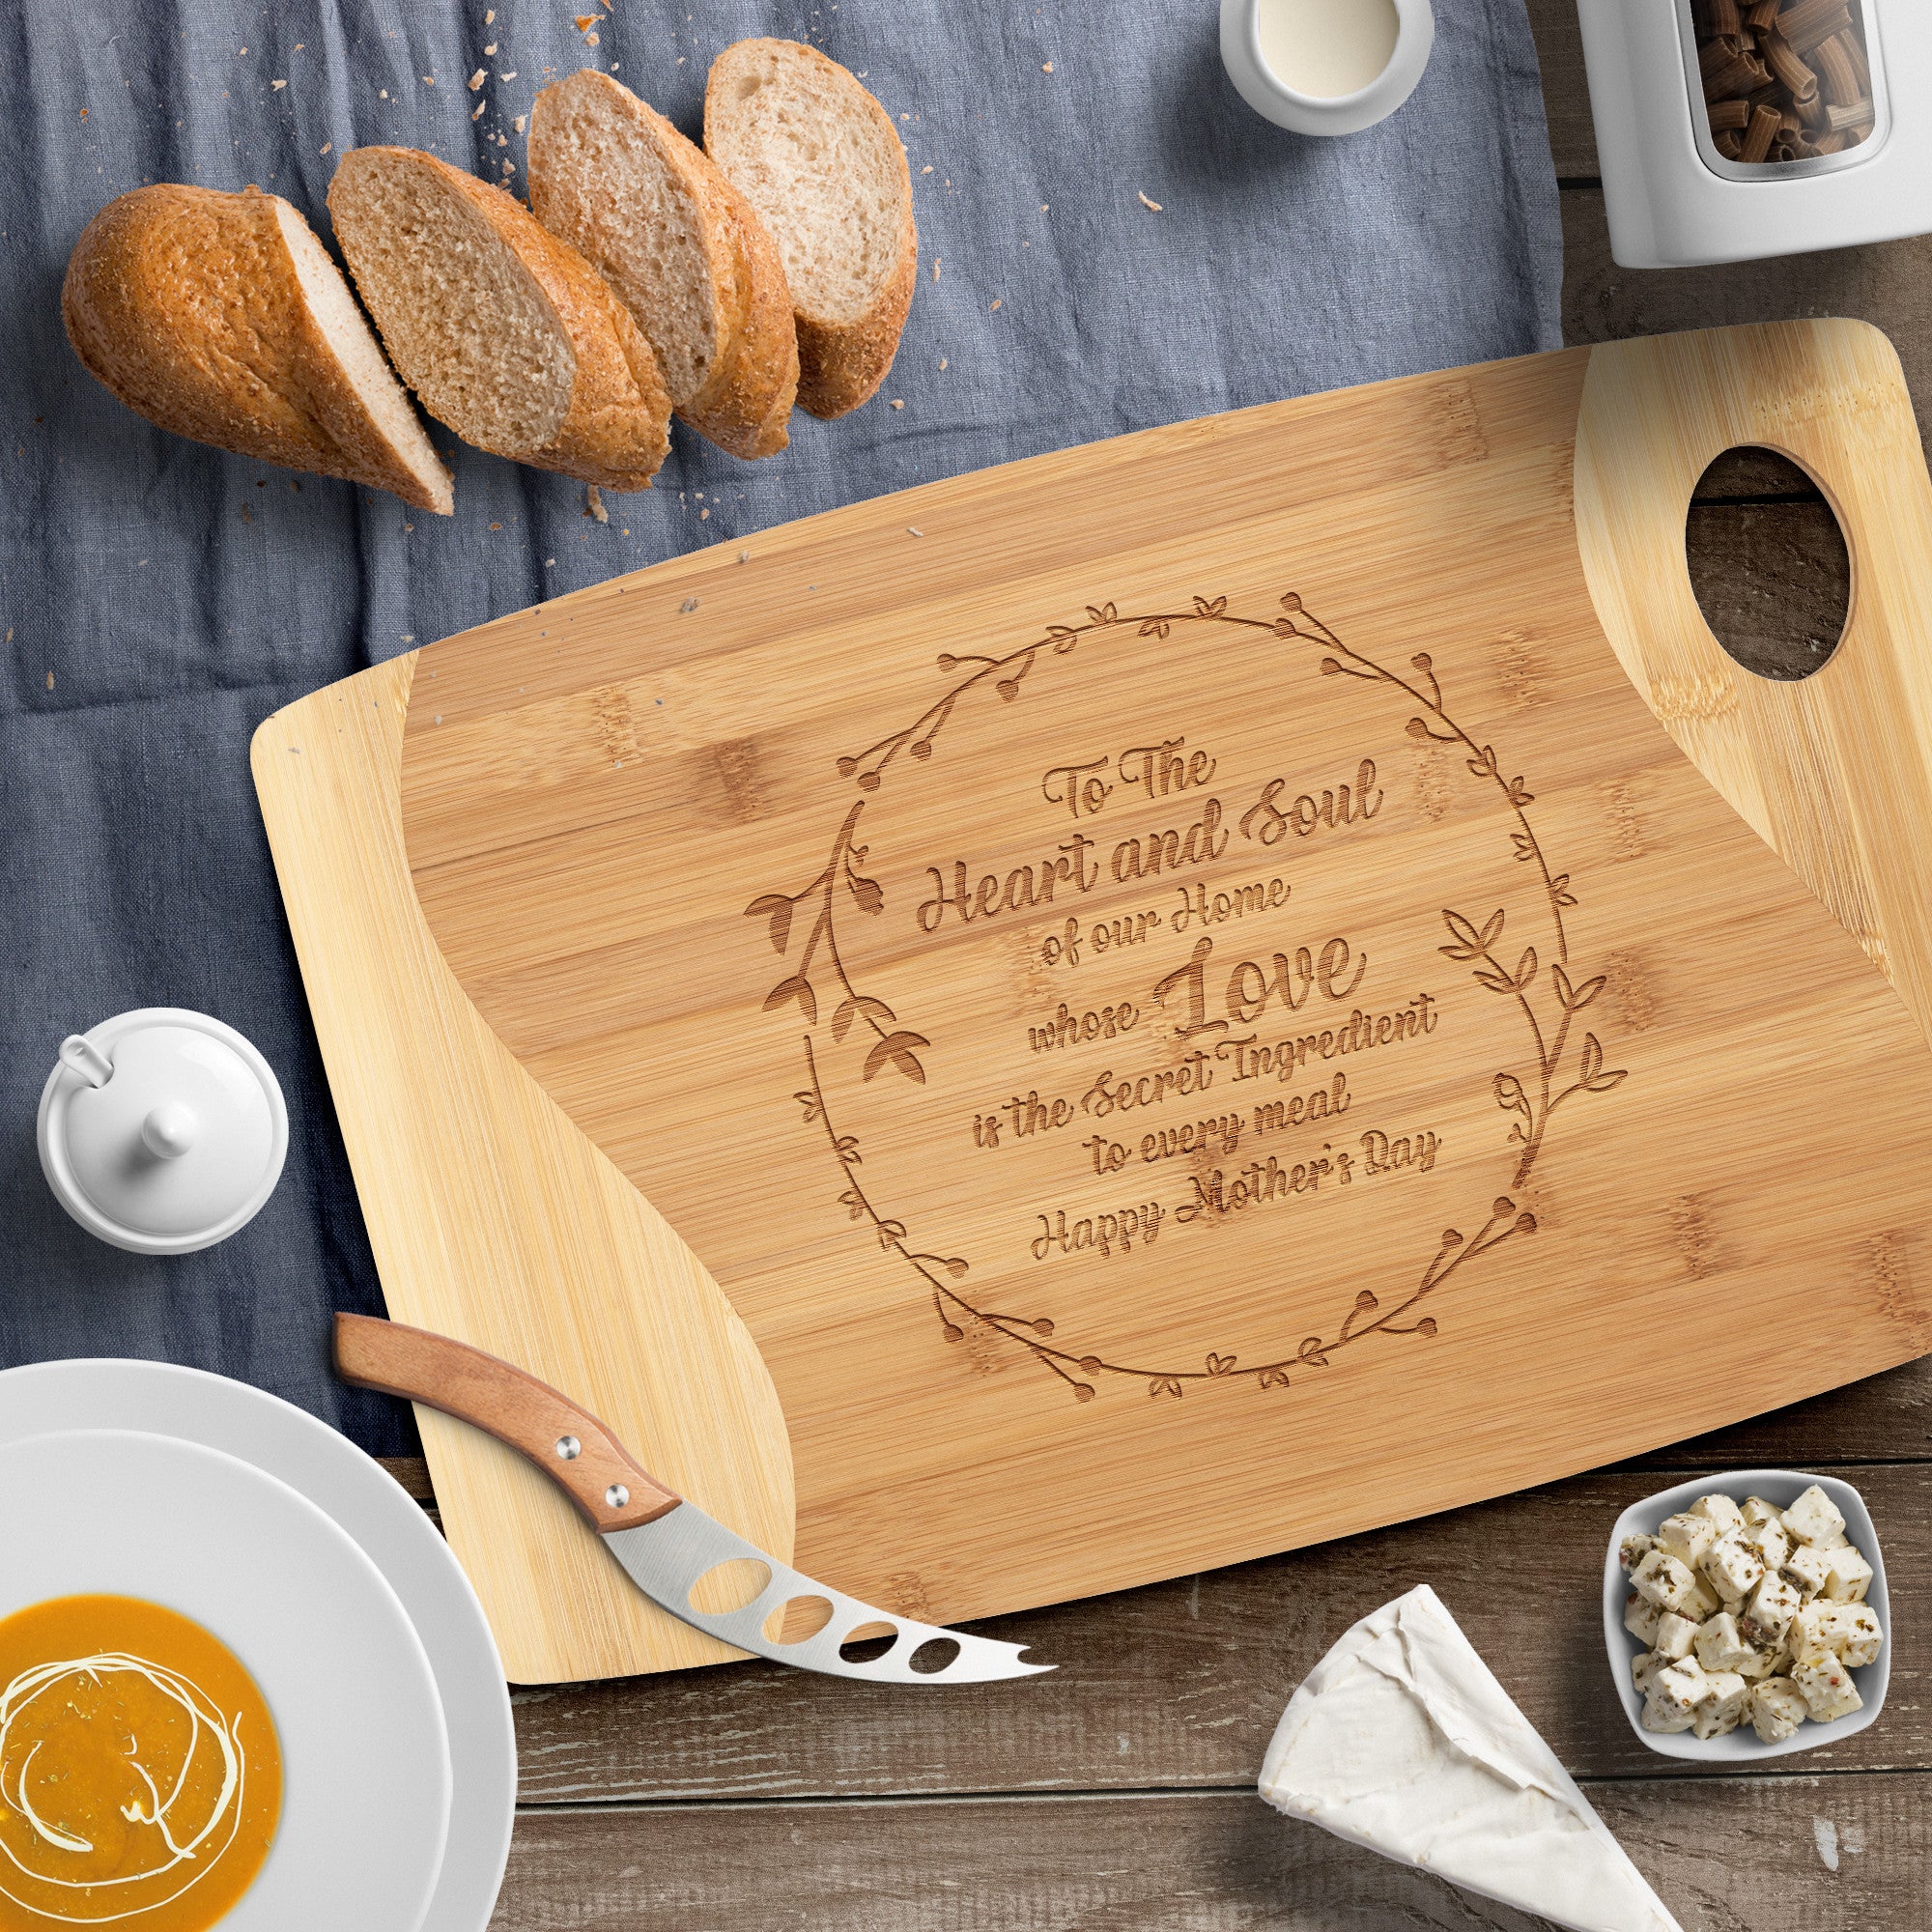 To The Heart and Soul - Cutting Board for Mother's Day